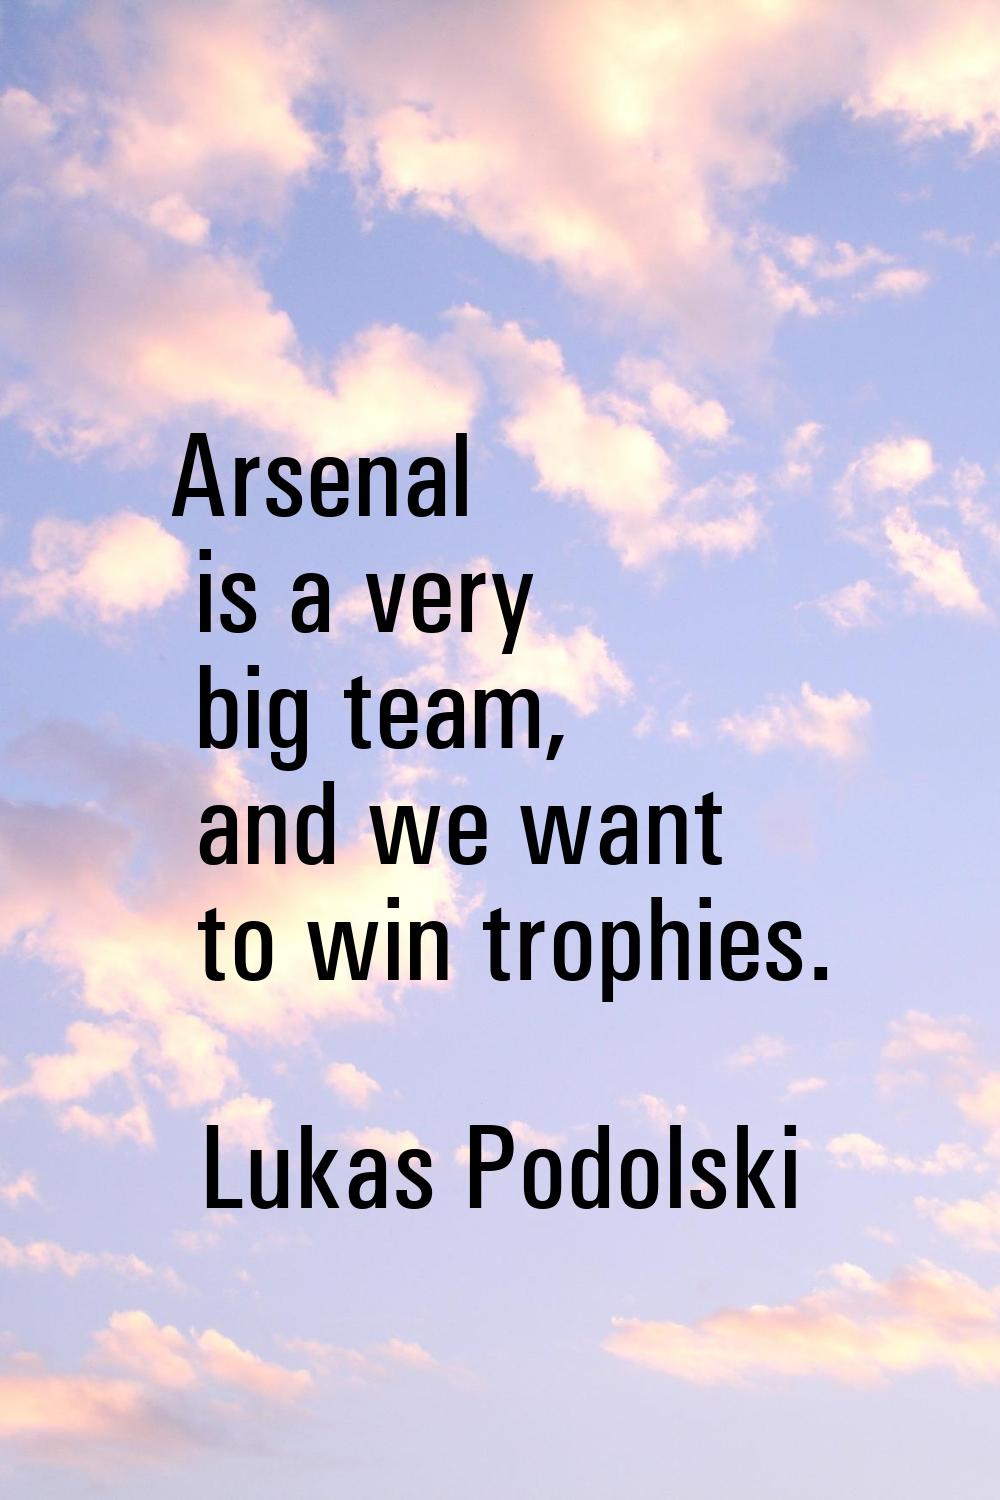 Arsenal is a very big team, and we want to win trophies.